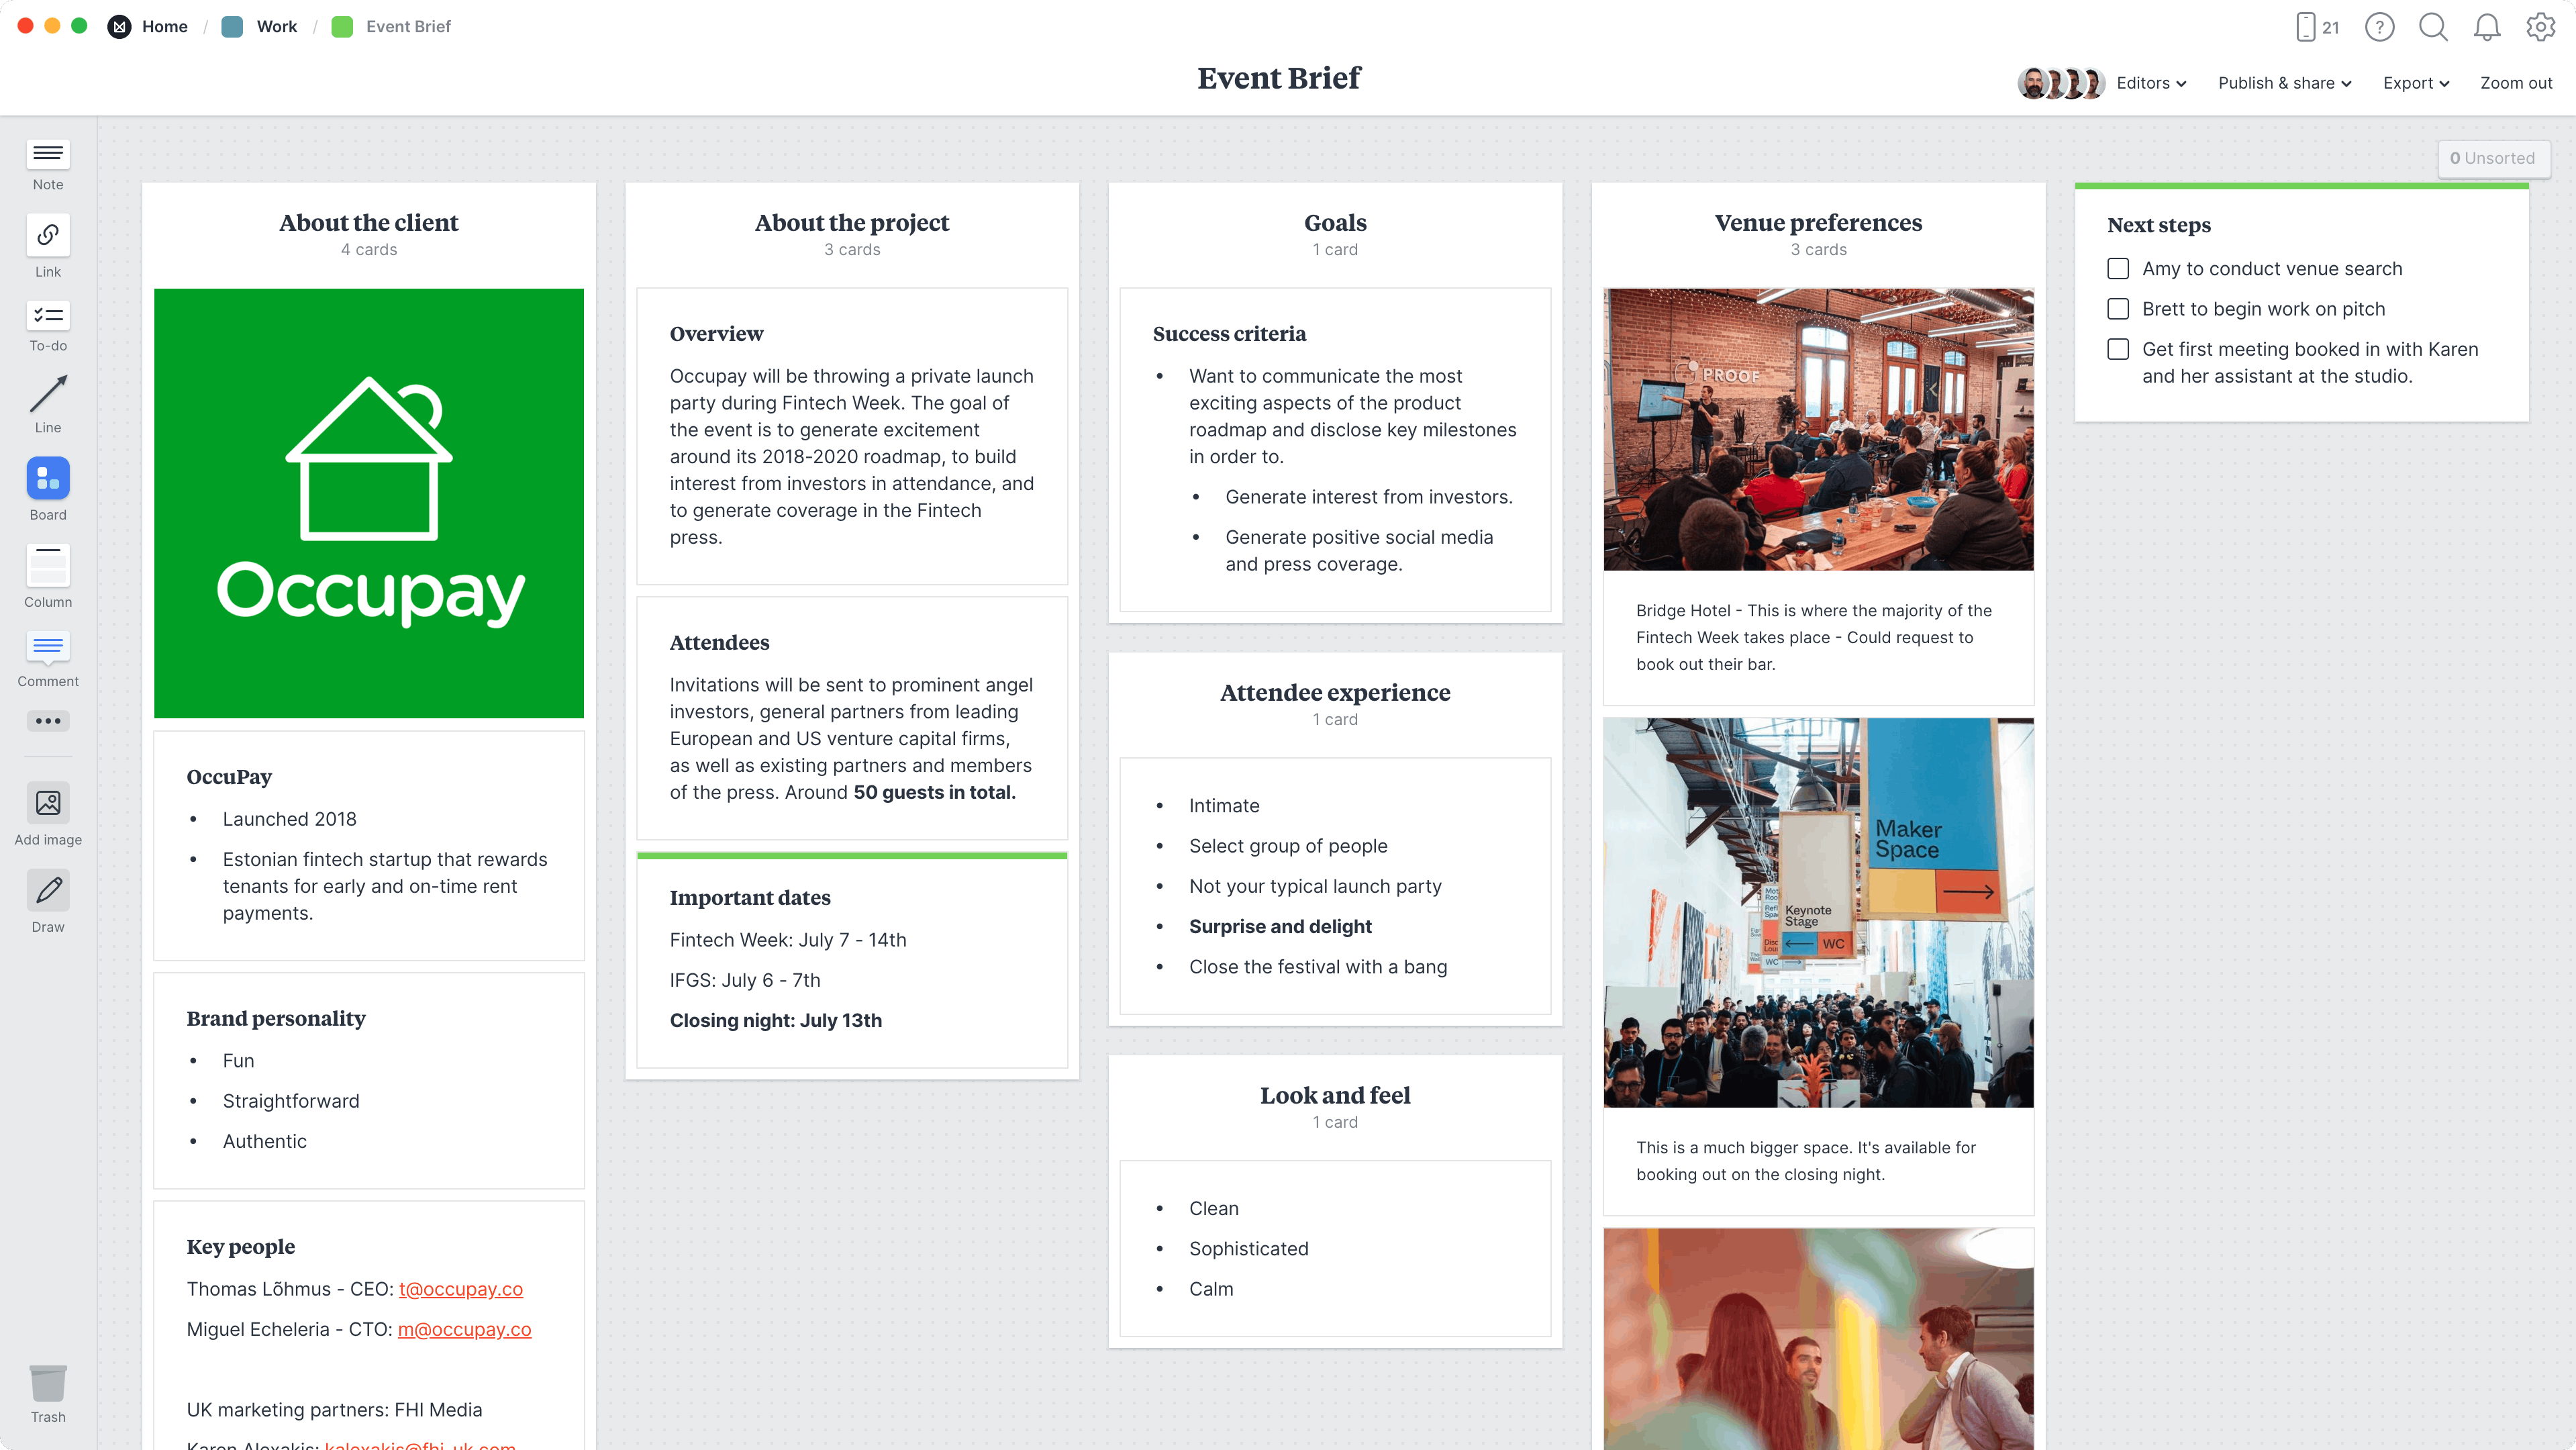 Event Brief Template, within the Milanote app